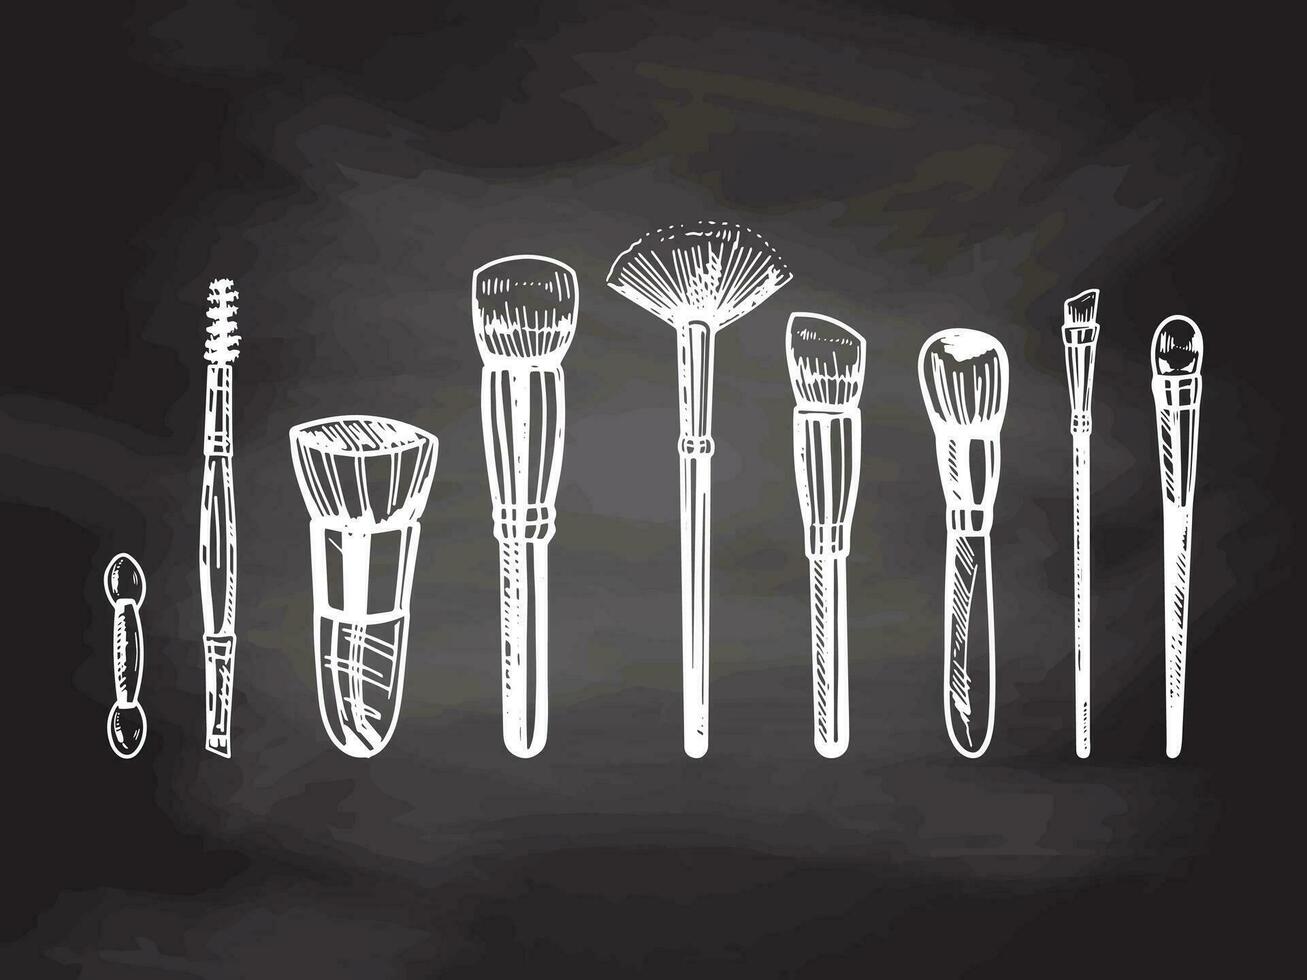 A set of hand-drawn doodle sketches of makeup brushes on chalkboard background.  Illustration for beauty salon, cosmetic store, makeup design. Engraved image. vector